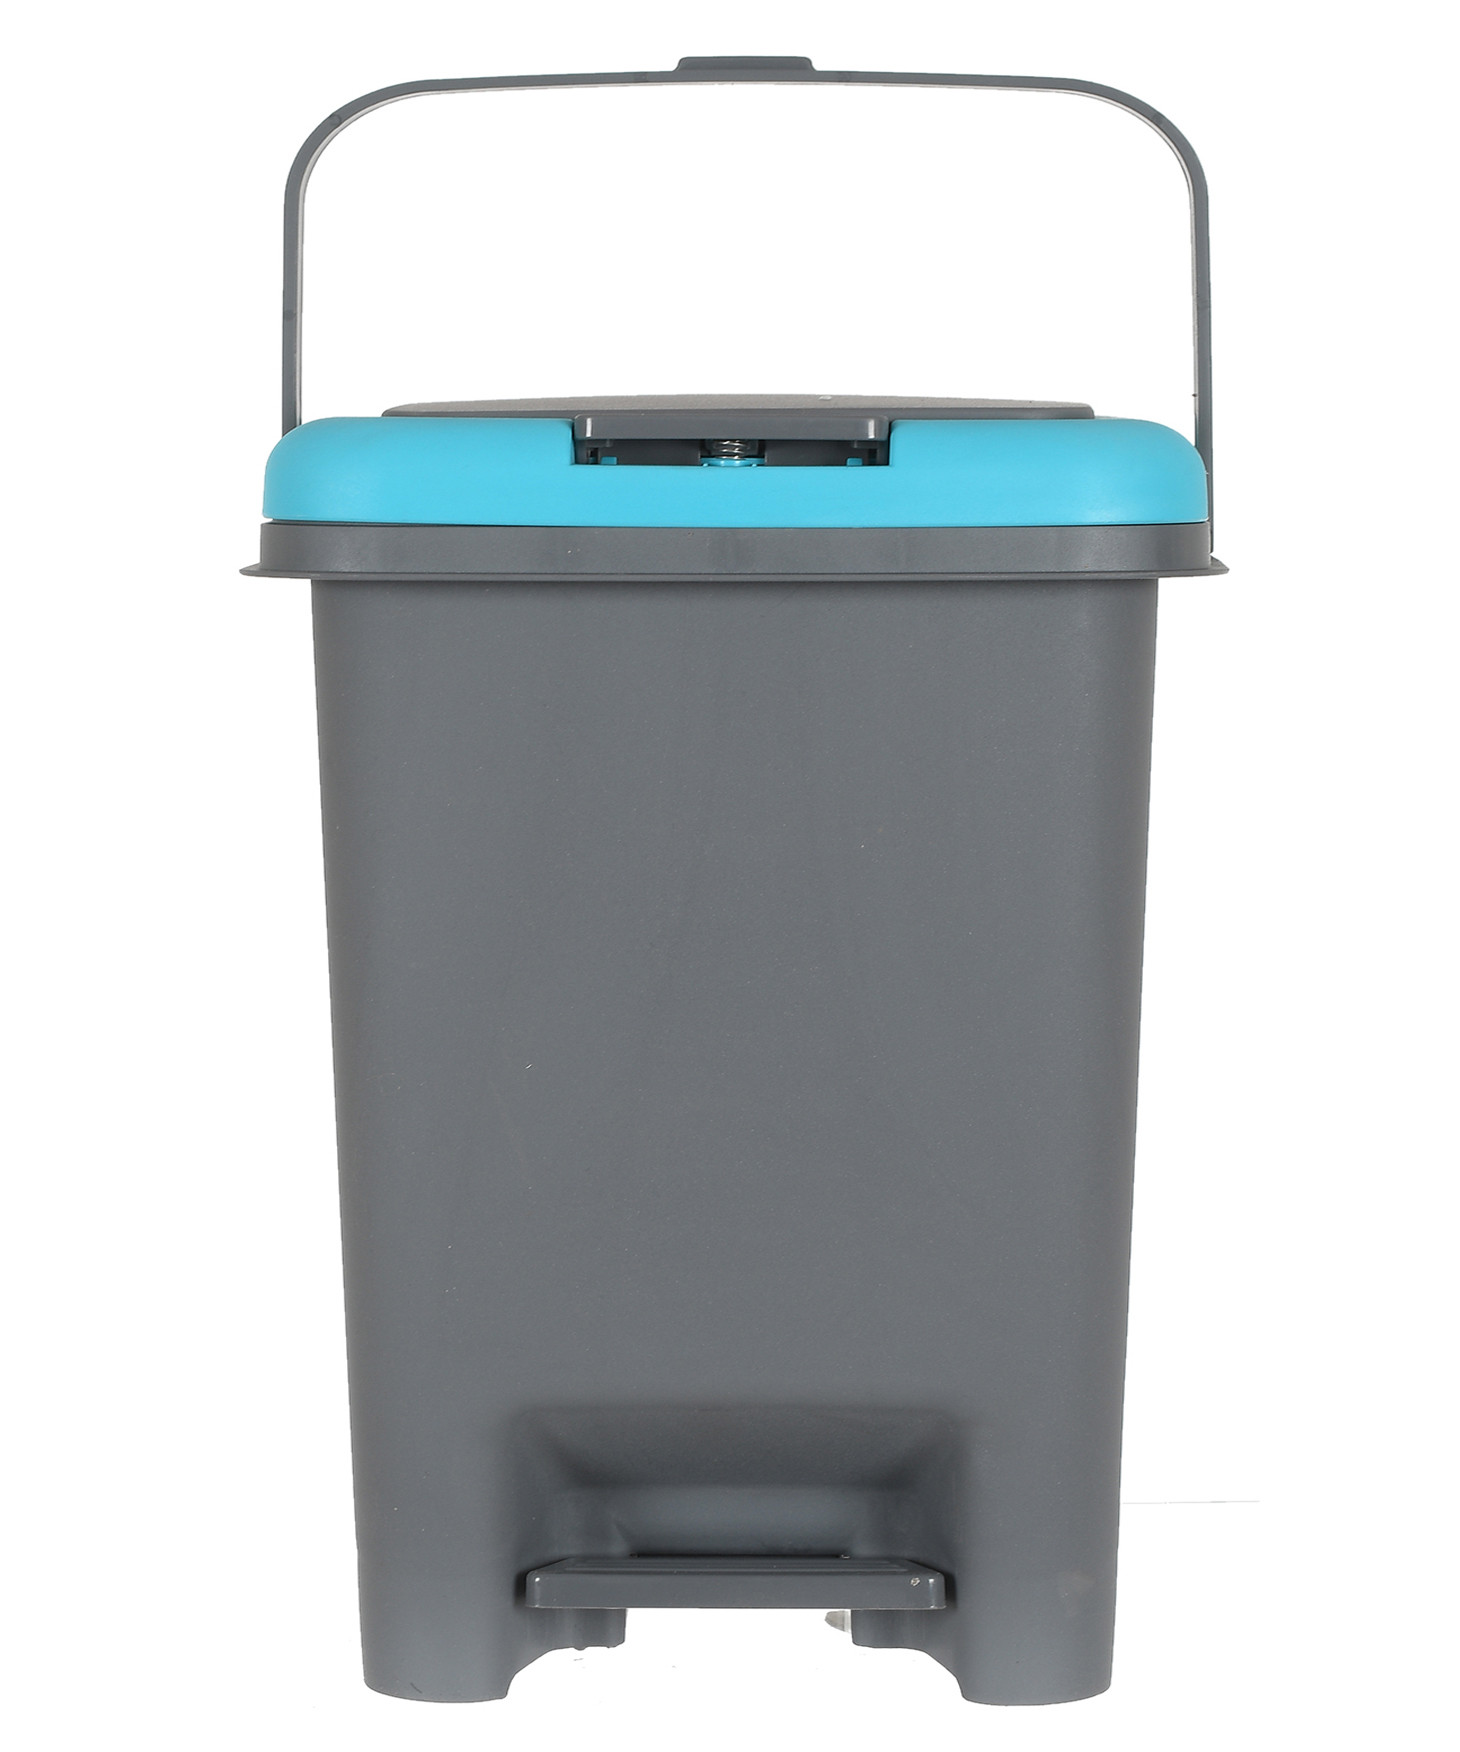 Kuber Industries Portable 10 Ltr Plastic Push And Pedal Dustbin With Lid & Handle Garbage Bins for Home Office (Grey & Blue)